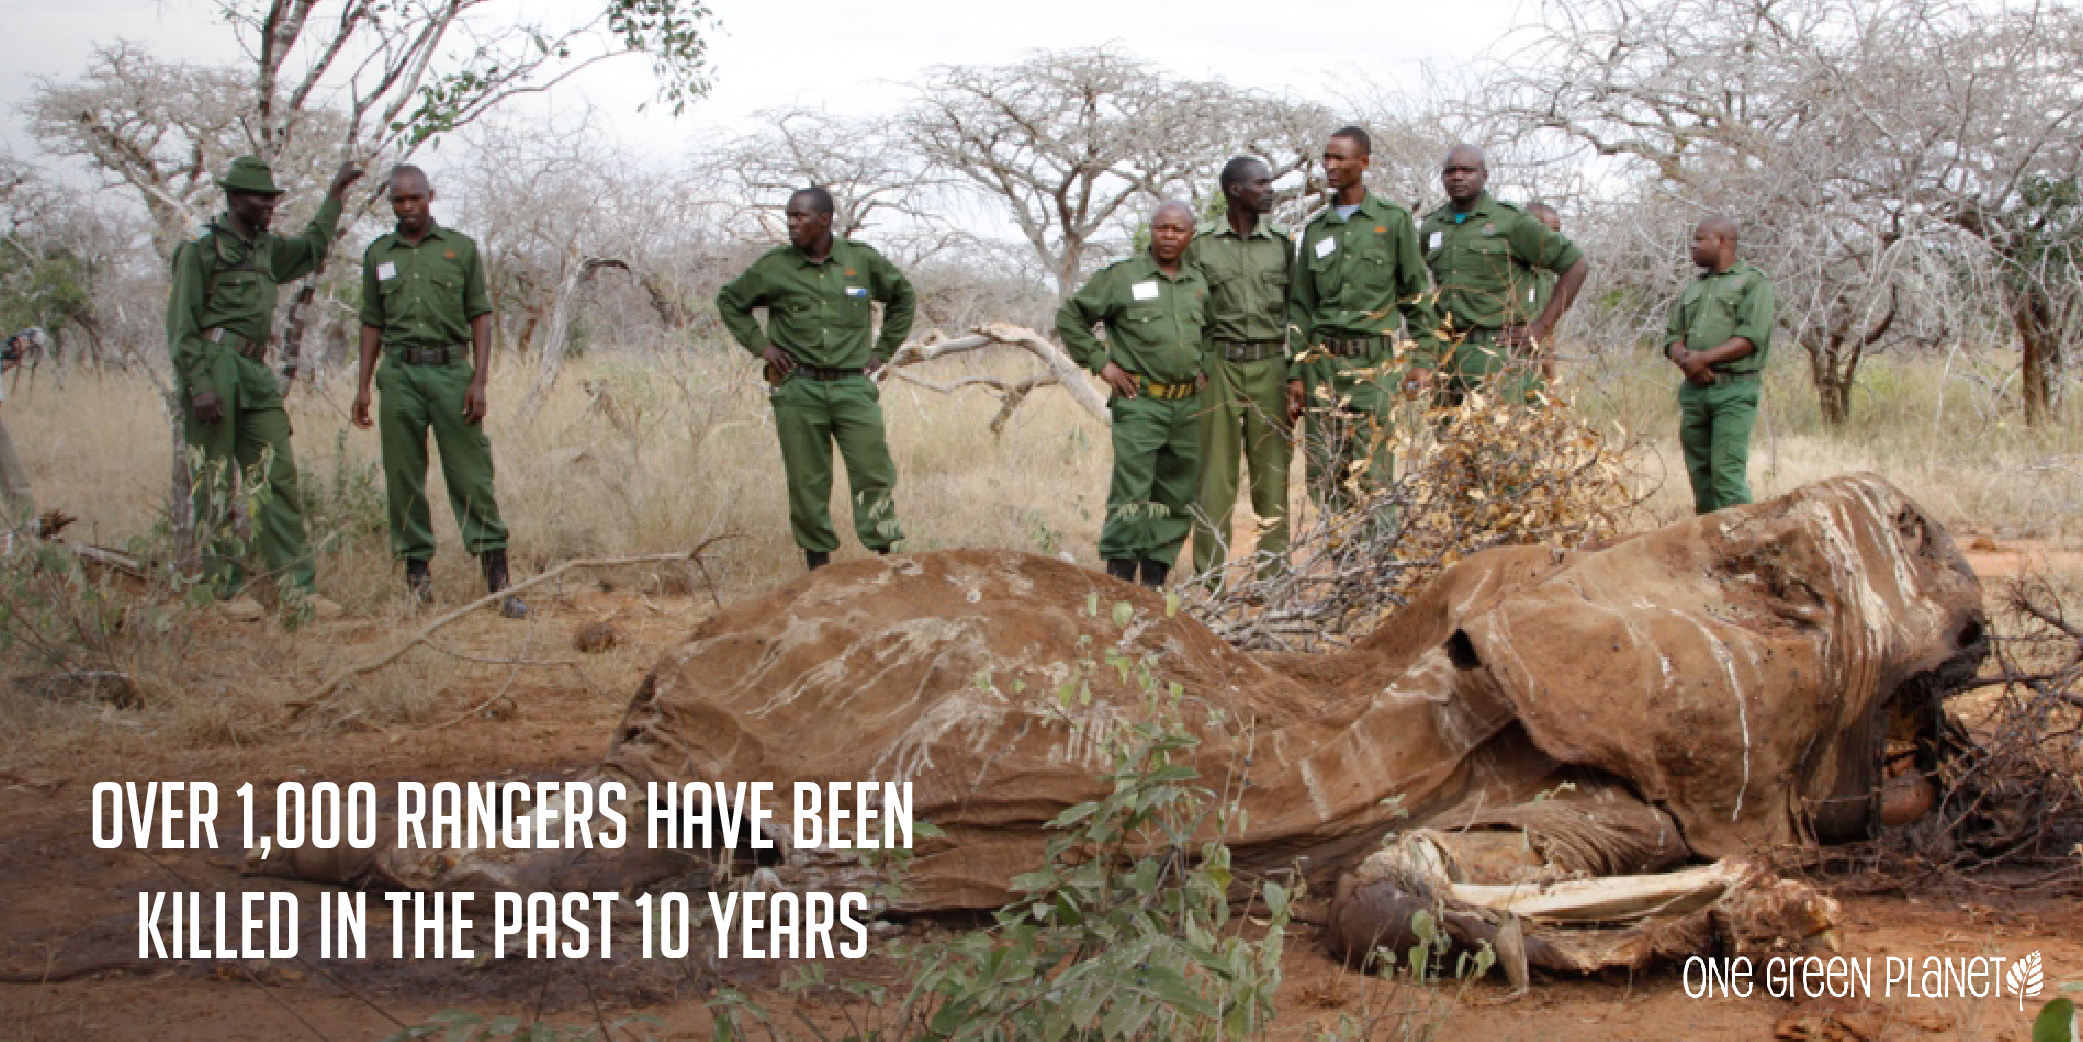 10 Shocking Facts About How the Illegal Wildlife Trade Drives Species Extinction